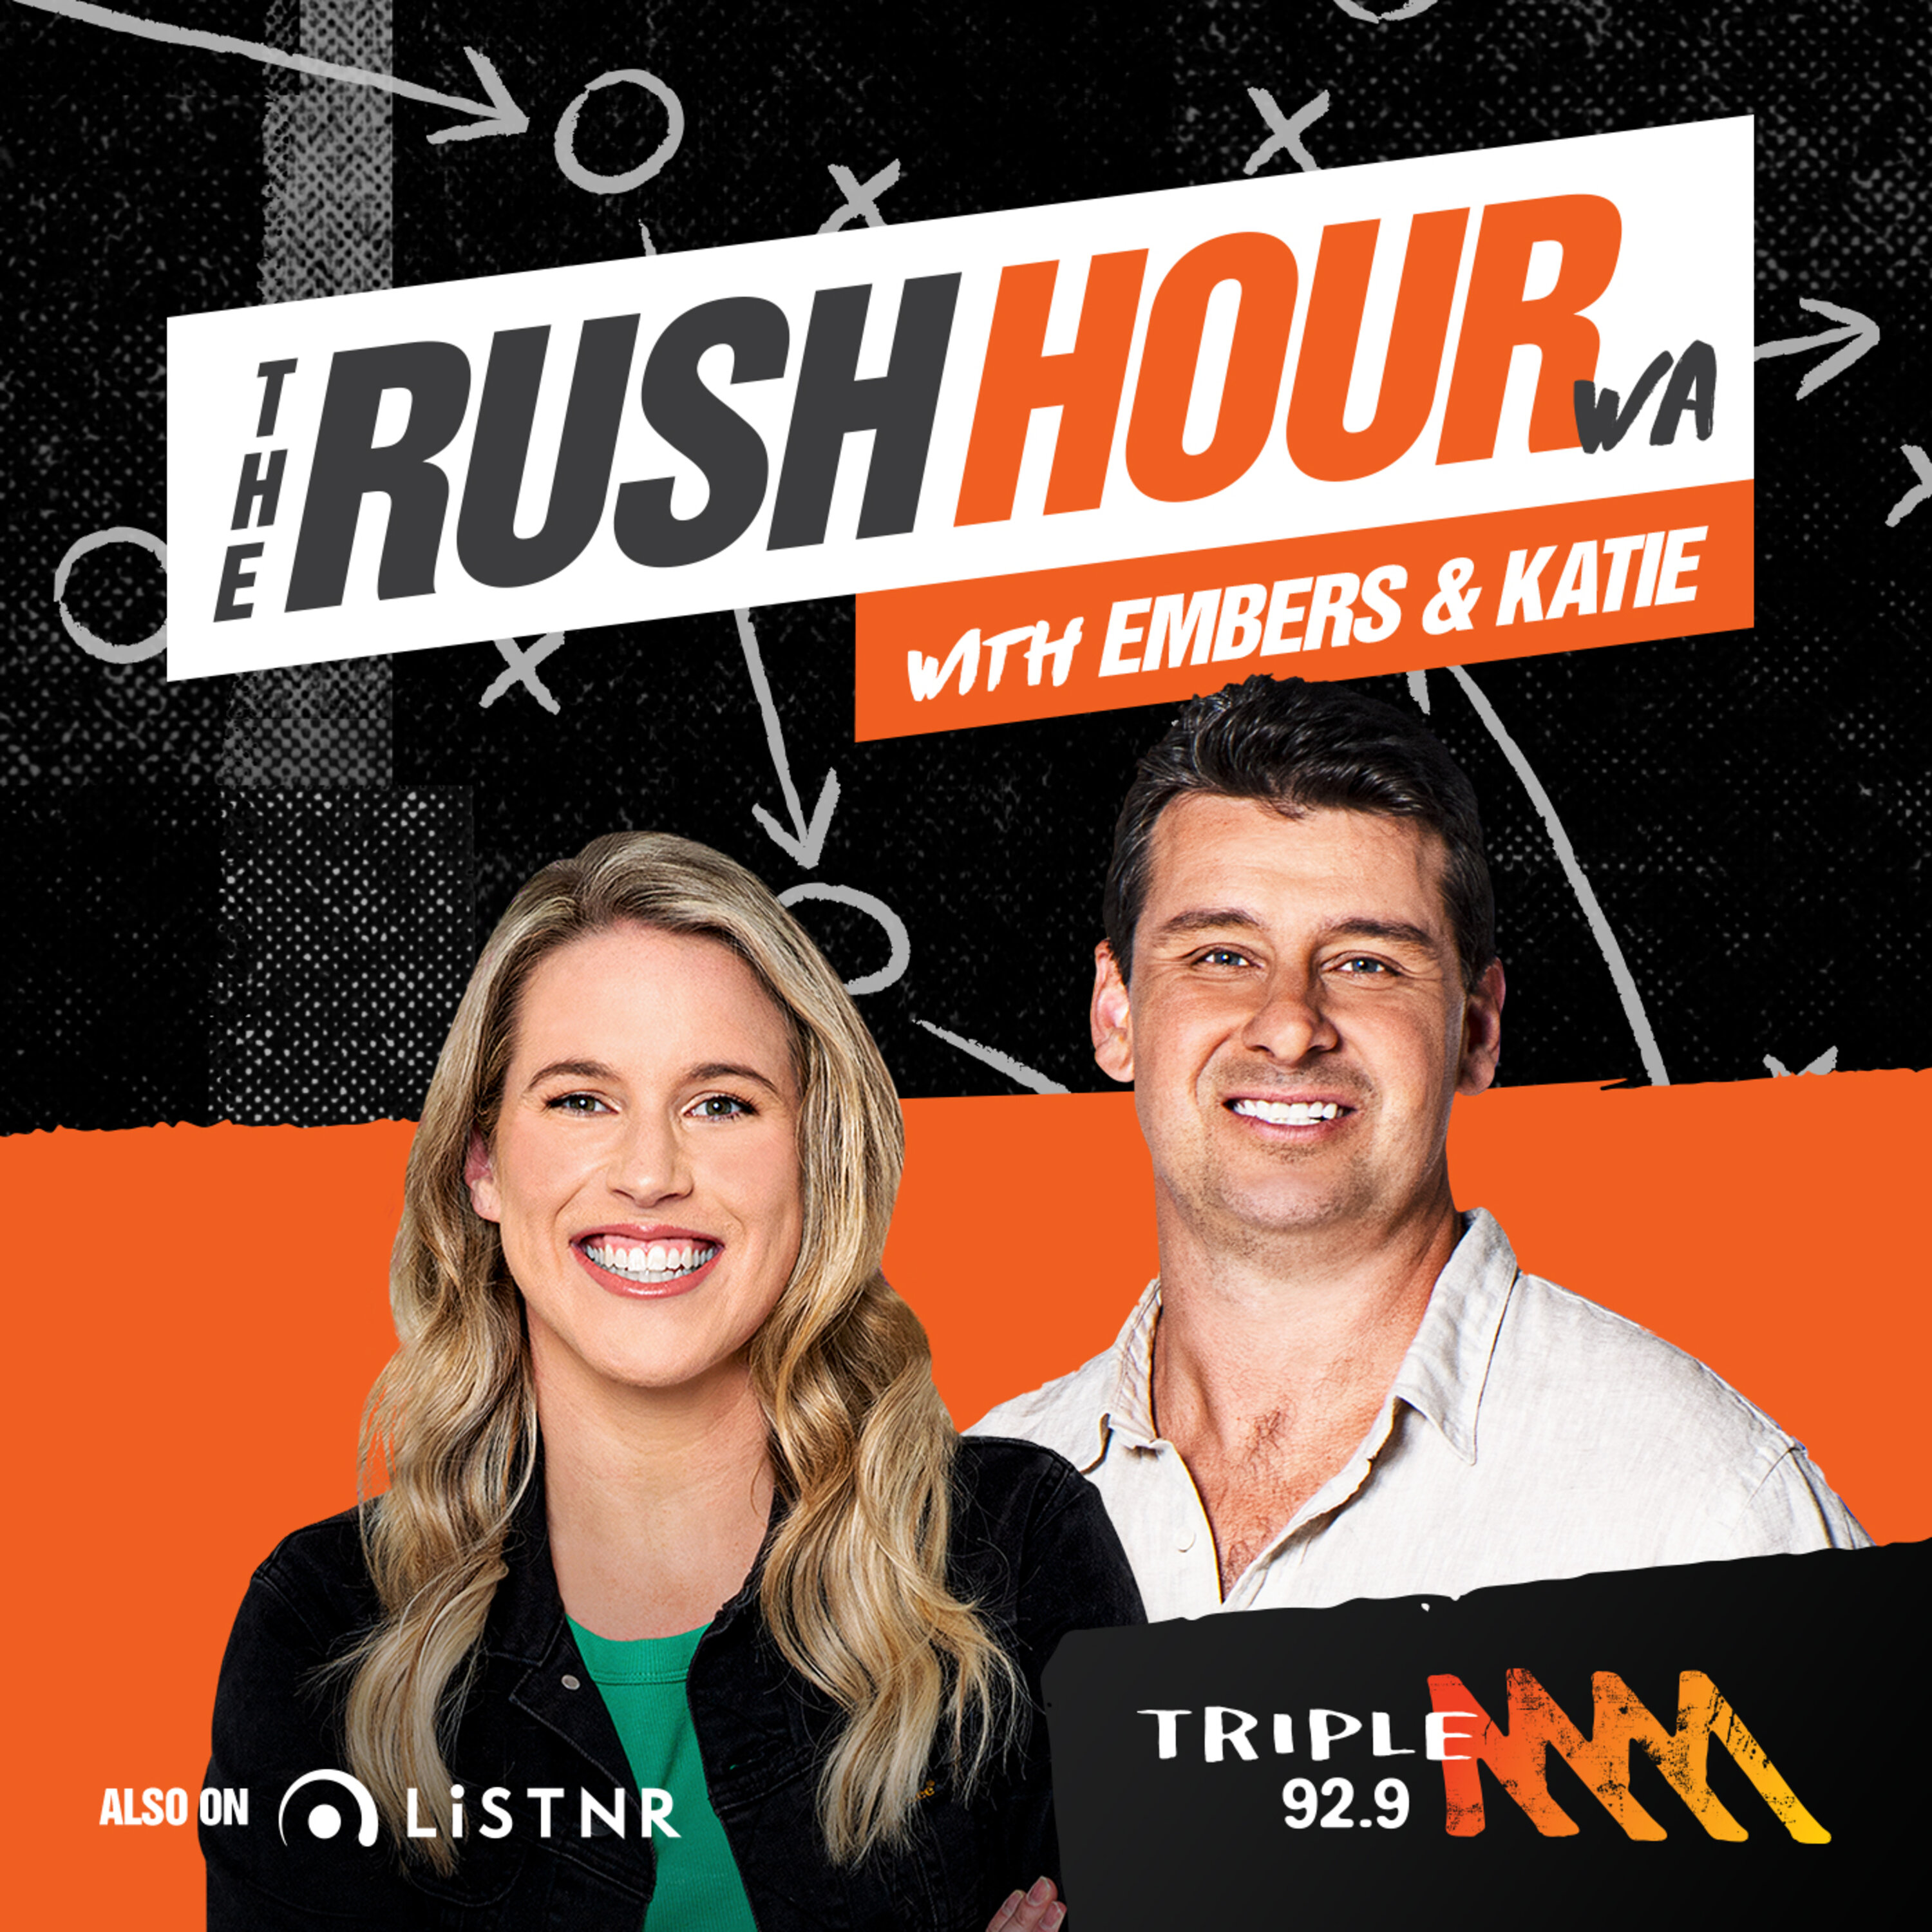 Rush Hour WA with Embers & Michelle